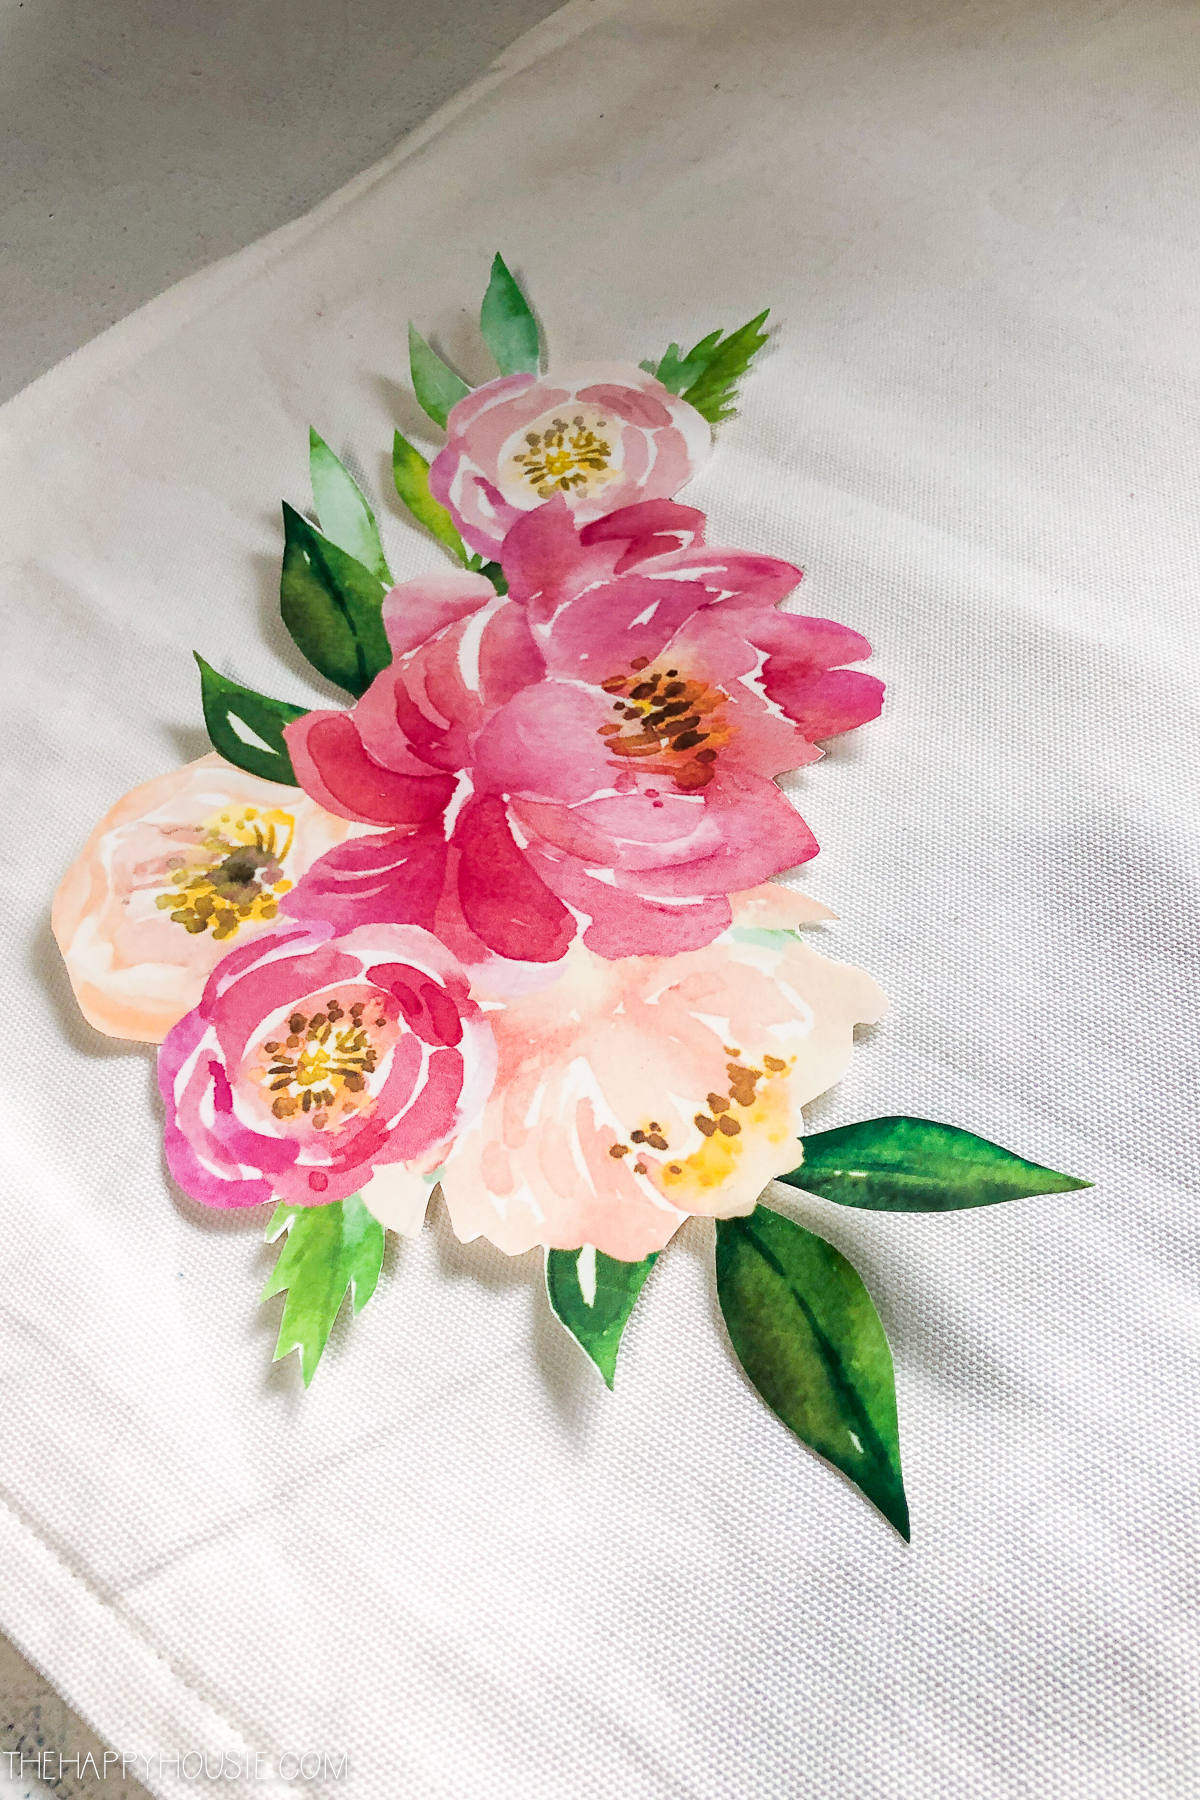 The floral design cut out and on the fabric.